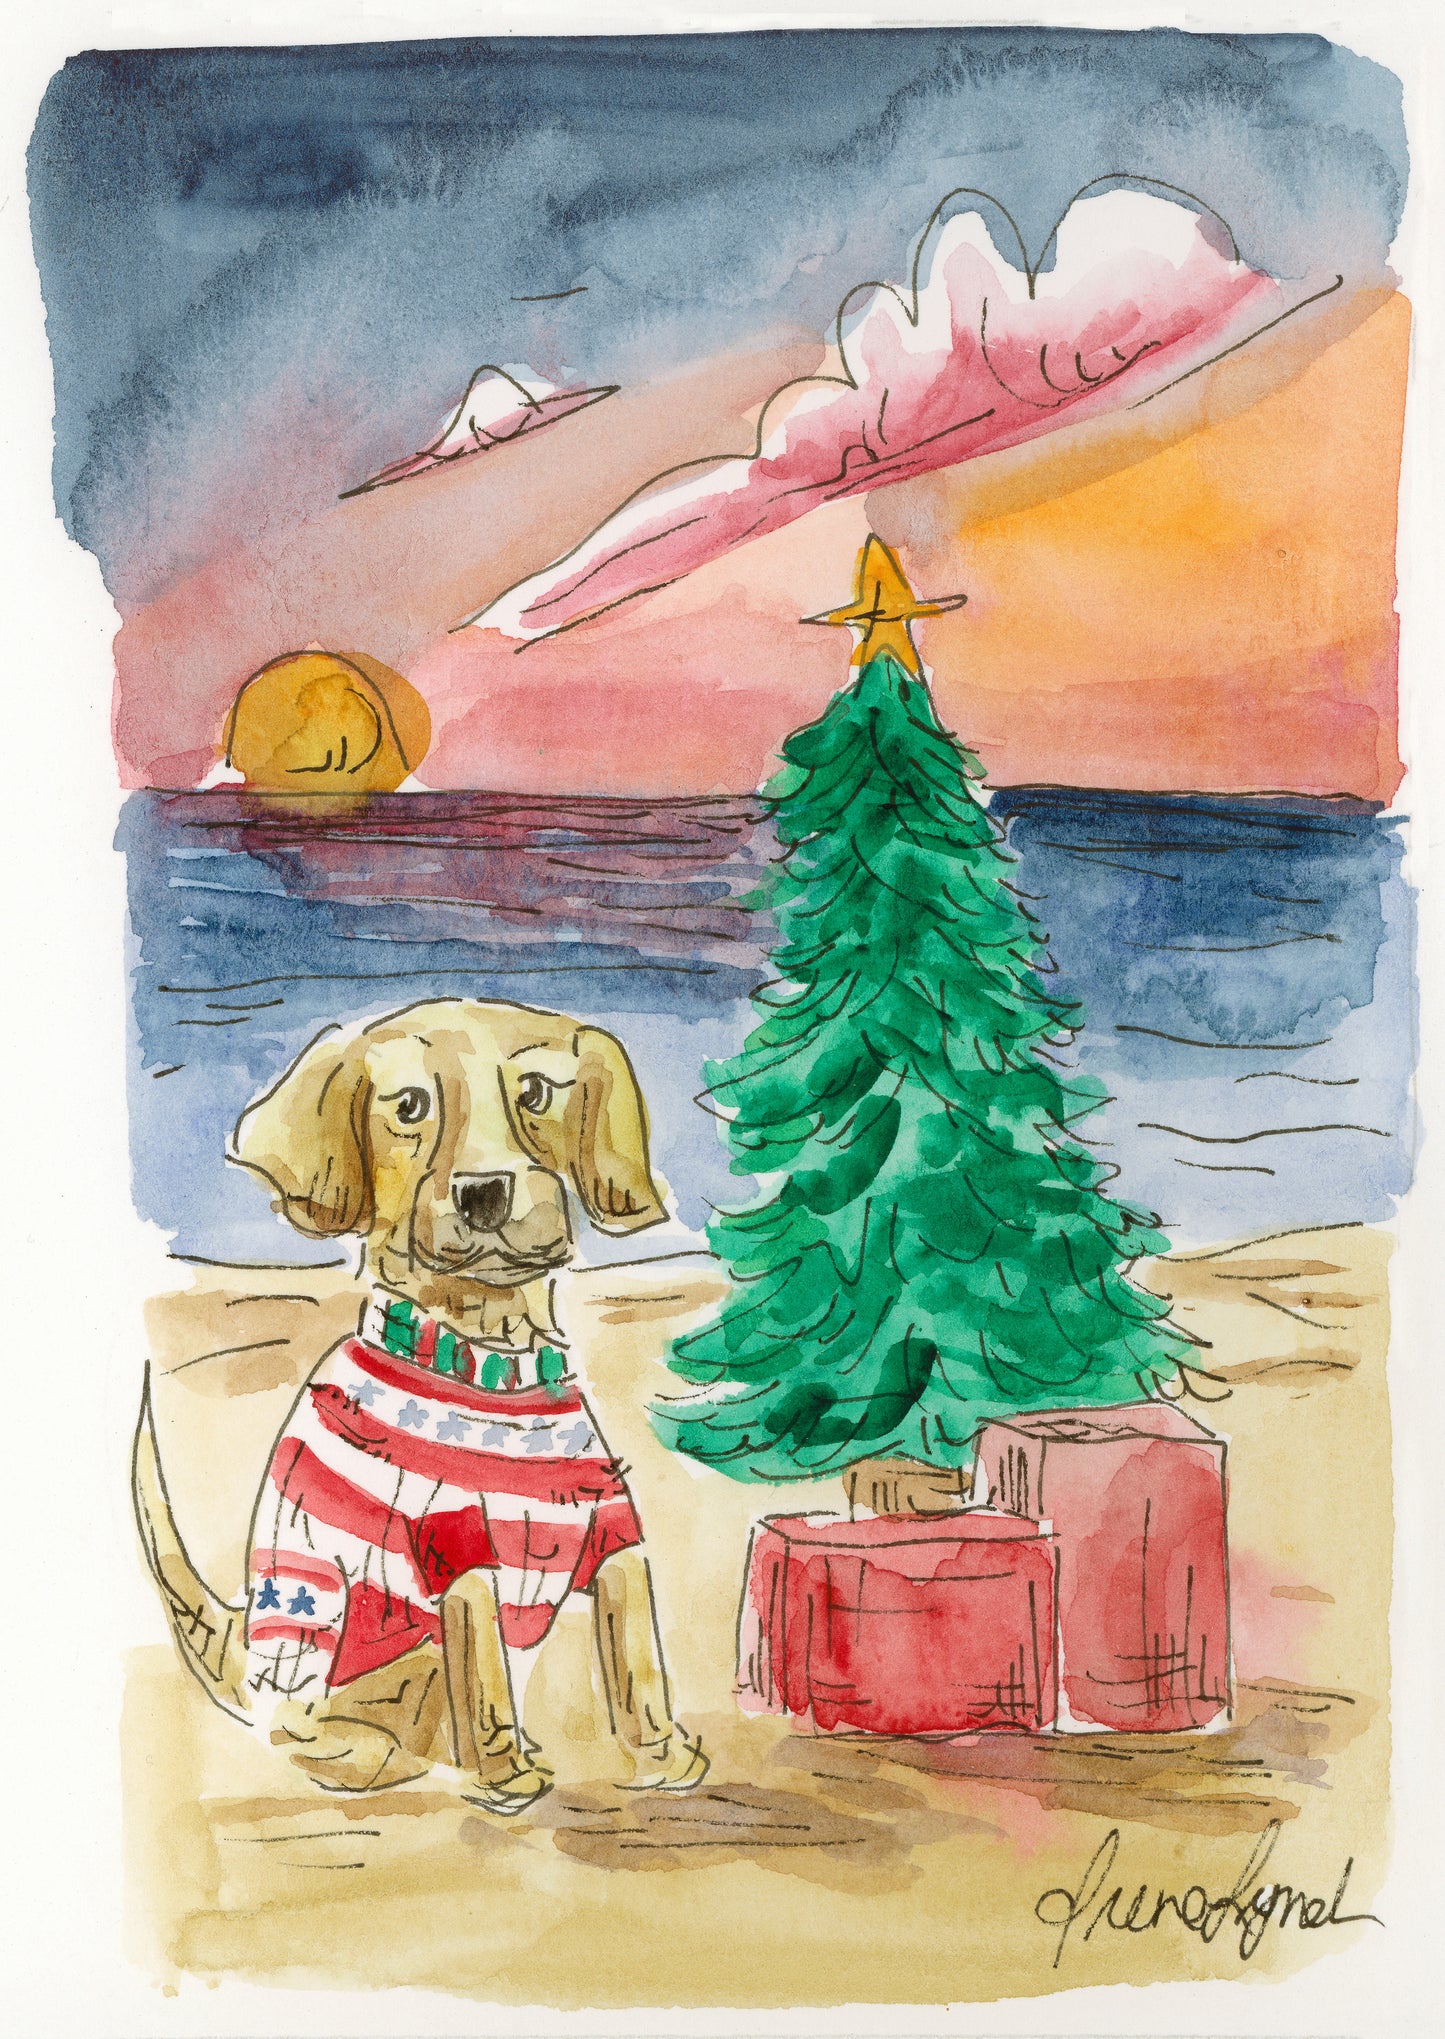 **New 2023 Collection** "I'm Dreaming of a Cape Cod Christmas" Holiday Card Box Set